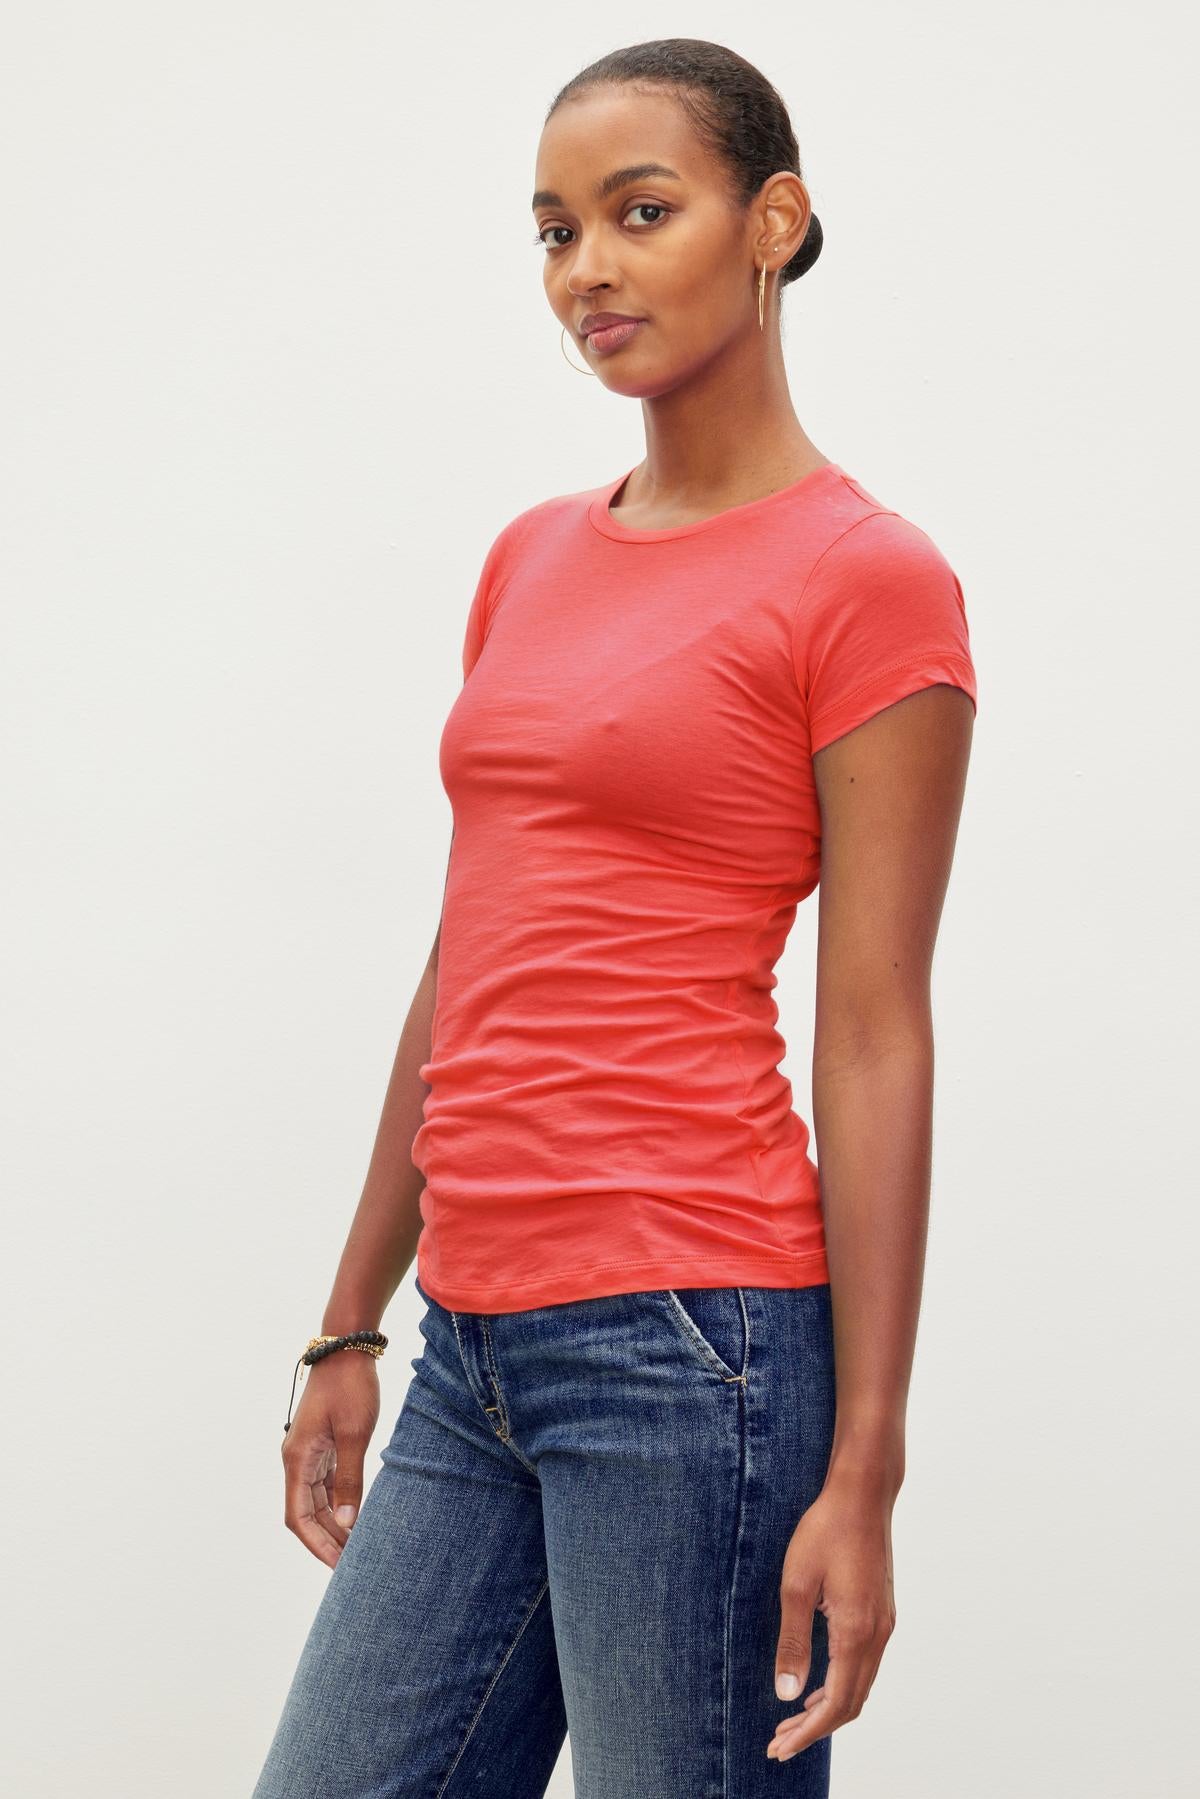 A woman wearing an iconic JEMMA GAUZY WHISPER FITTED CREW NECK TEE in red by Velvet by Graham & Spencer.-36002770452673